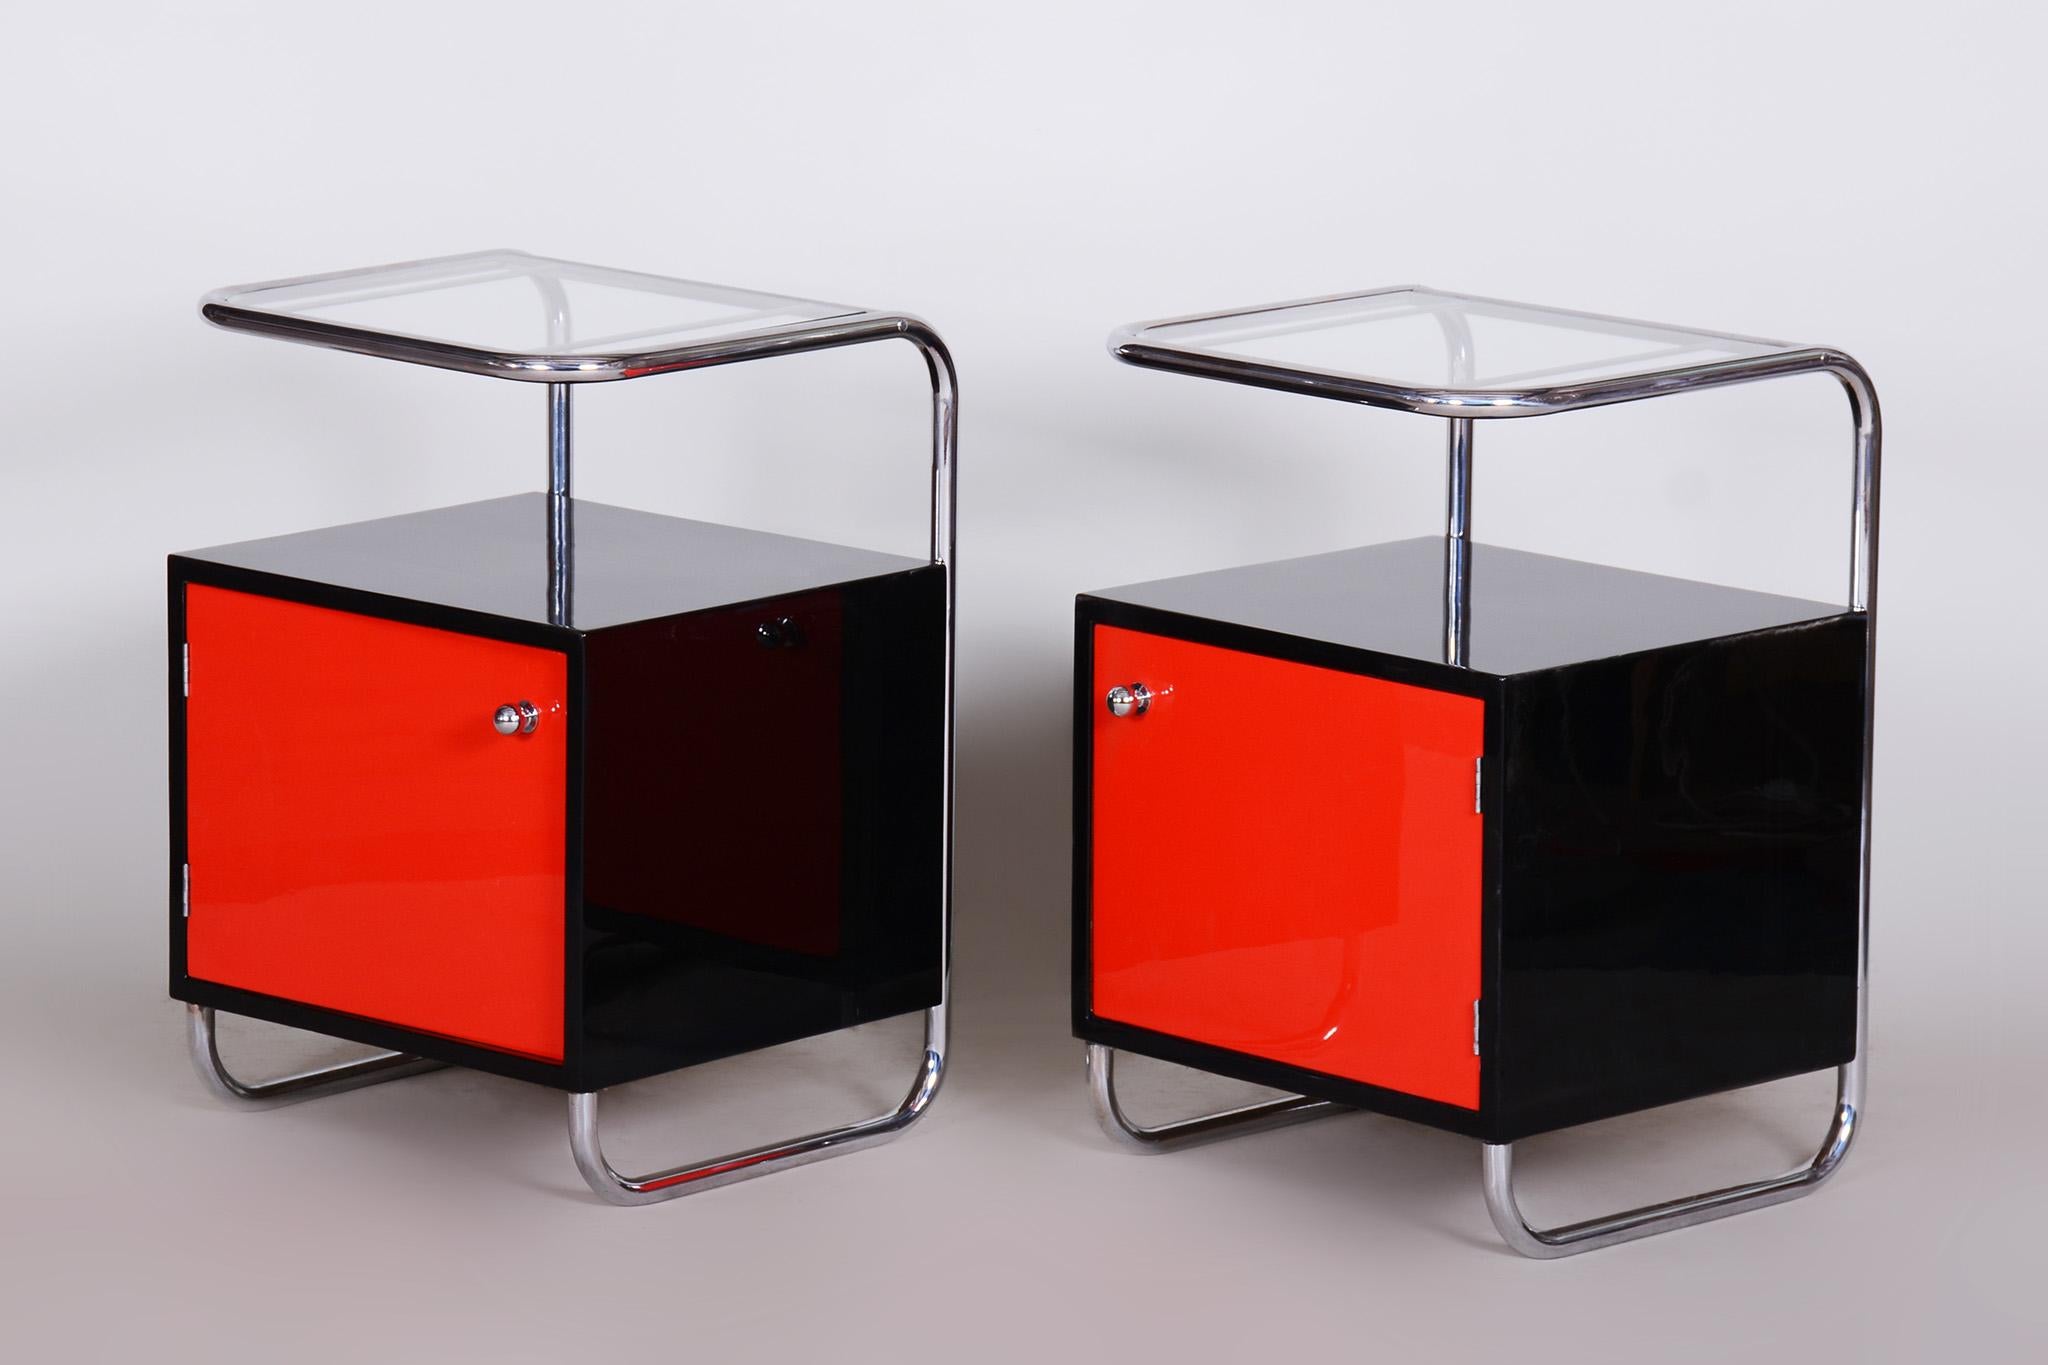 Mid-20th Century Black and Red Vichr a Spol Bedside Tables, 1930s Czechia For Sale